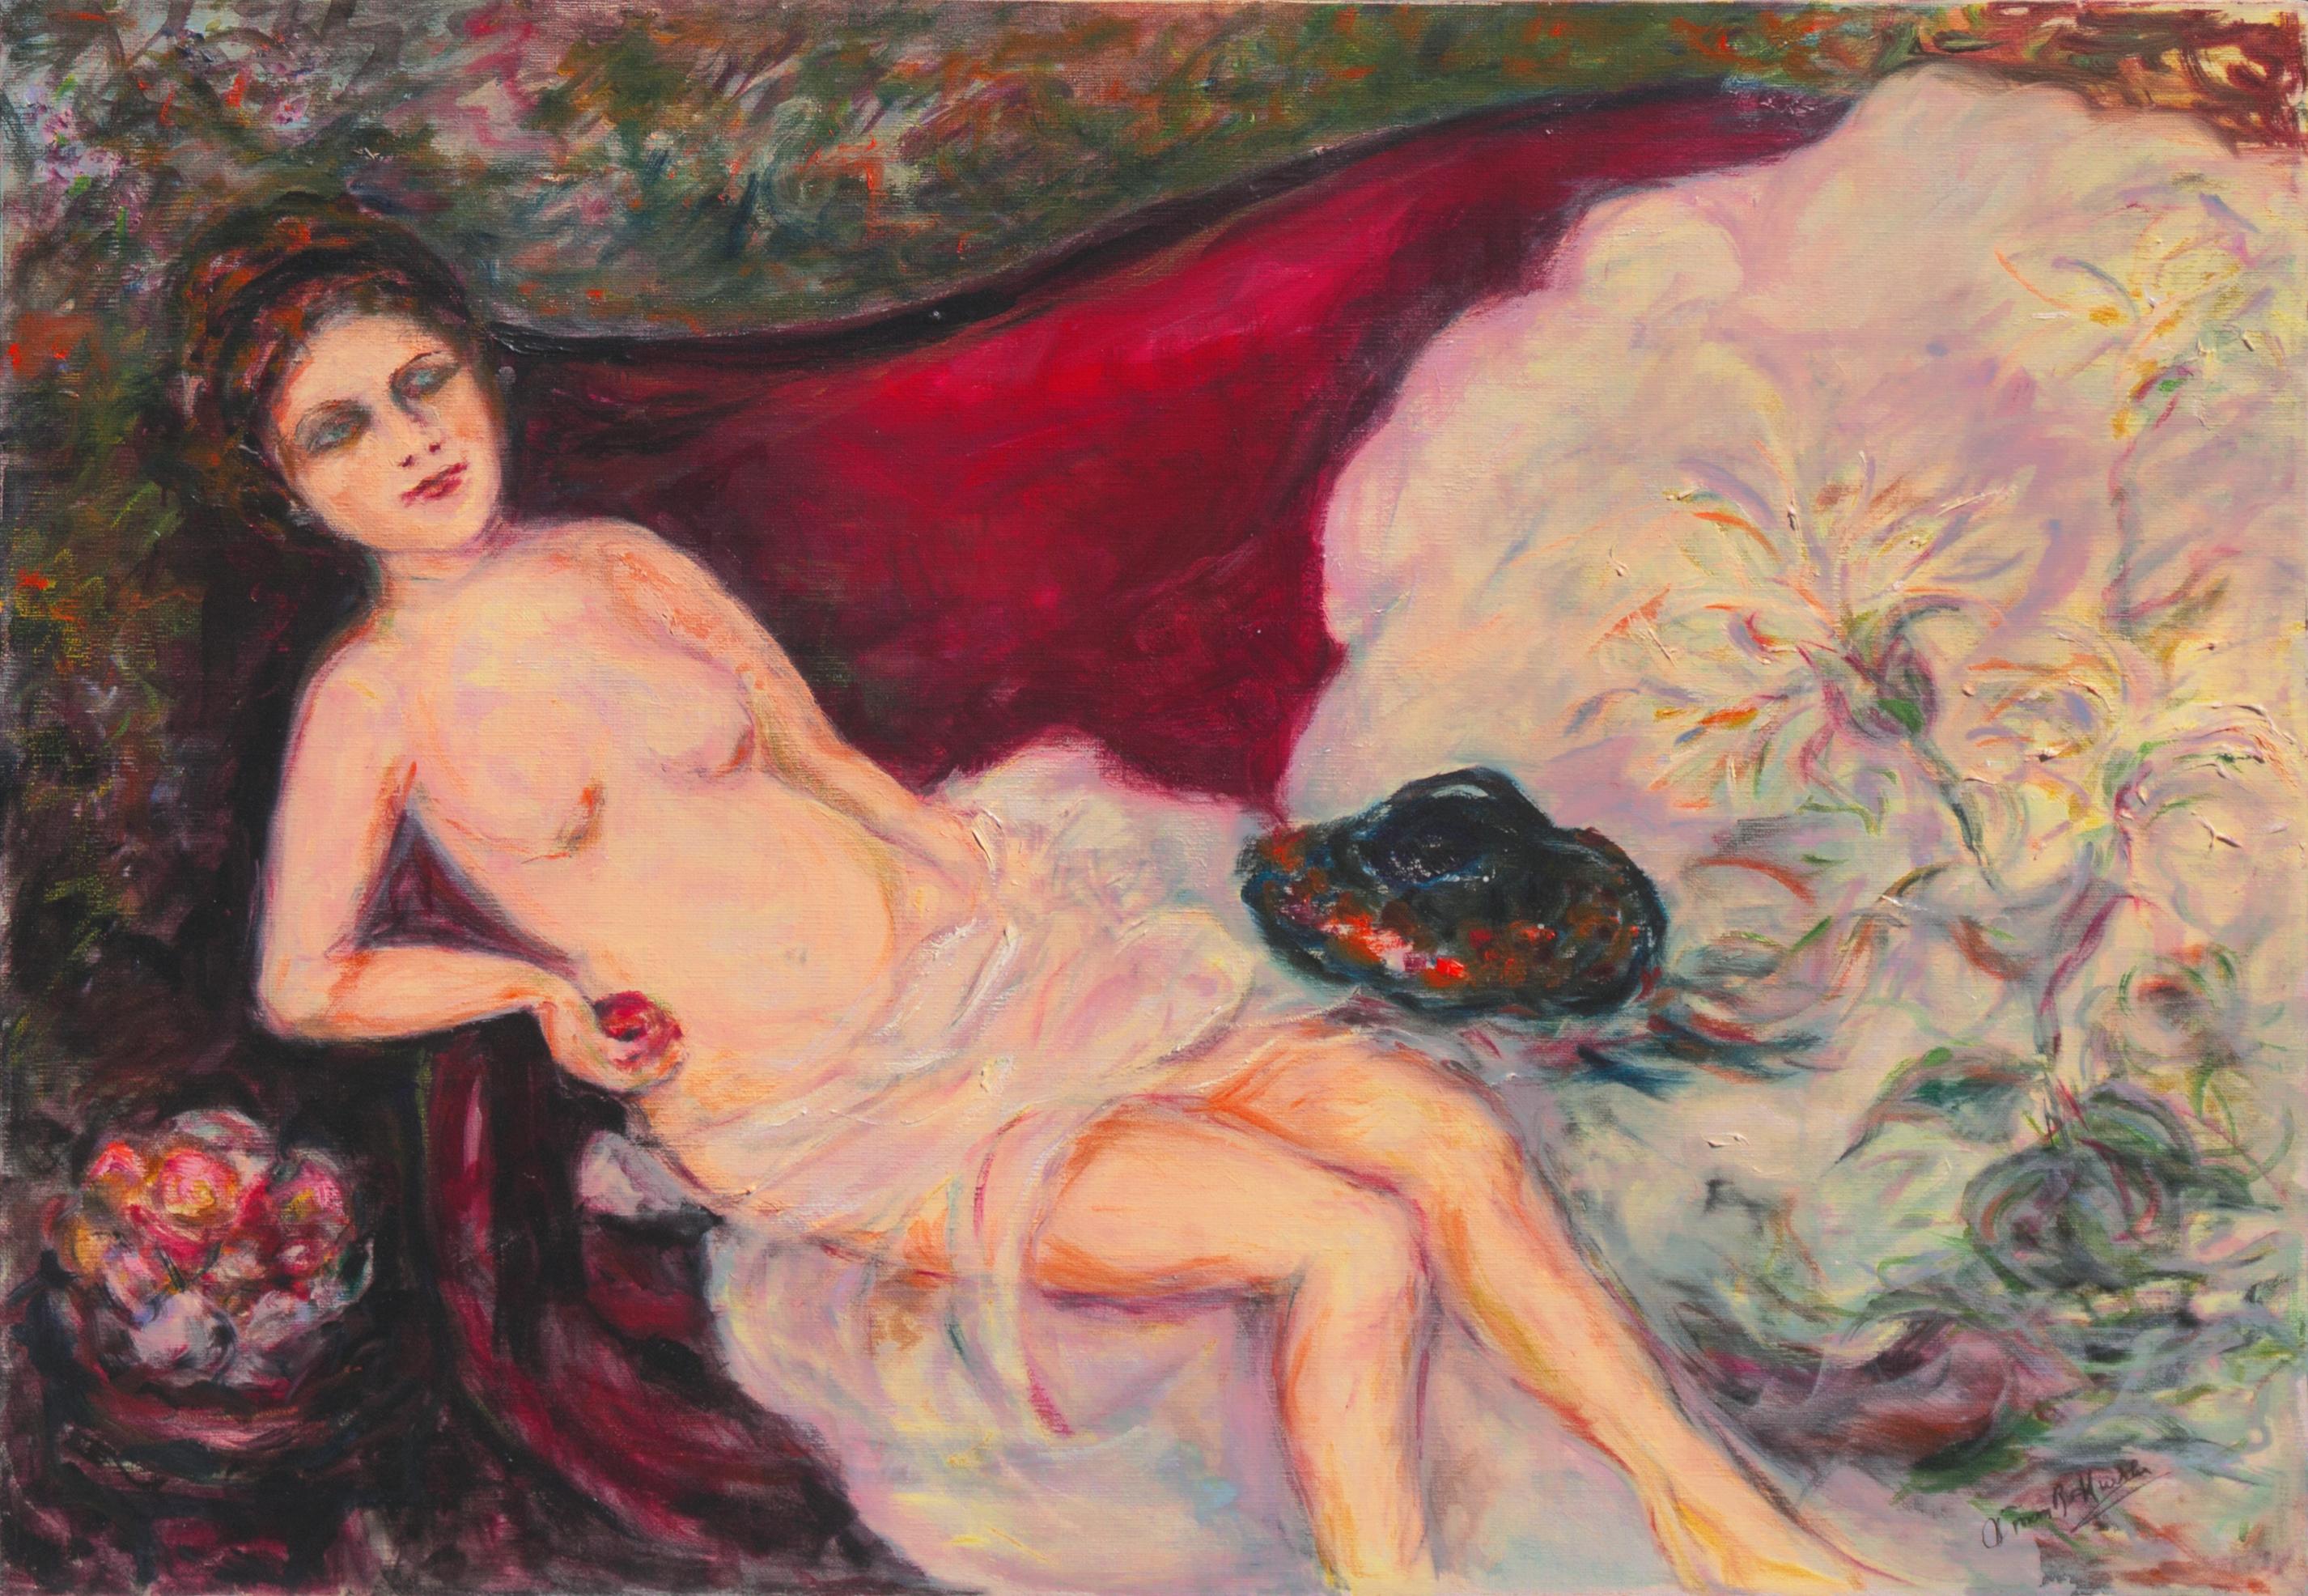 Vivian Ruth Huebler Nude Painting - 'Reclining Nude', San Francisco Woman Artist, Large Post-Impressionist Oil